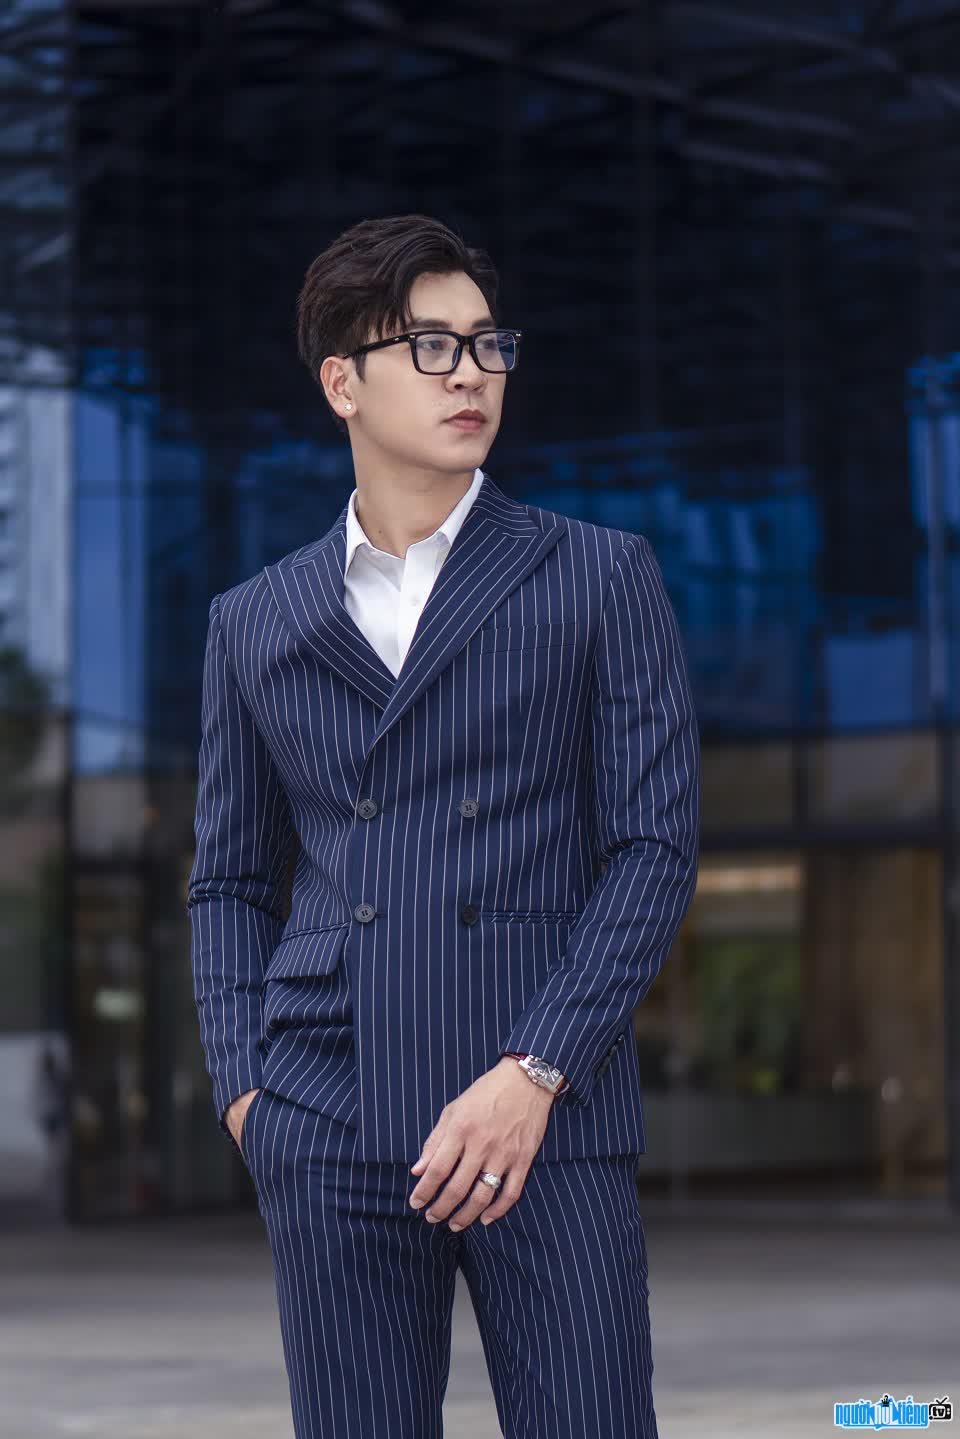 Model Eric To orients to become a creative talent